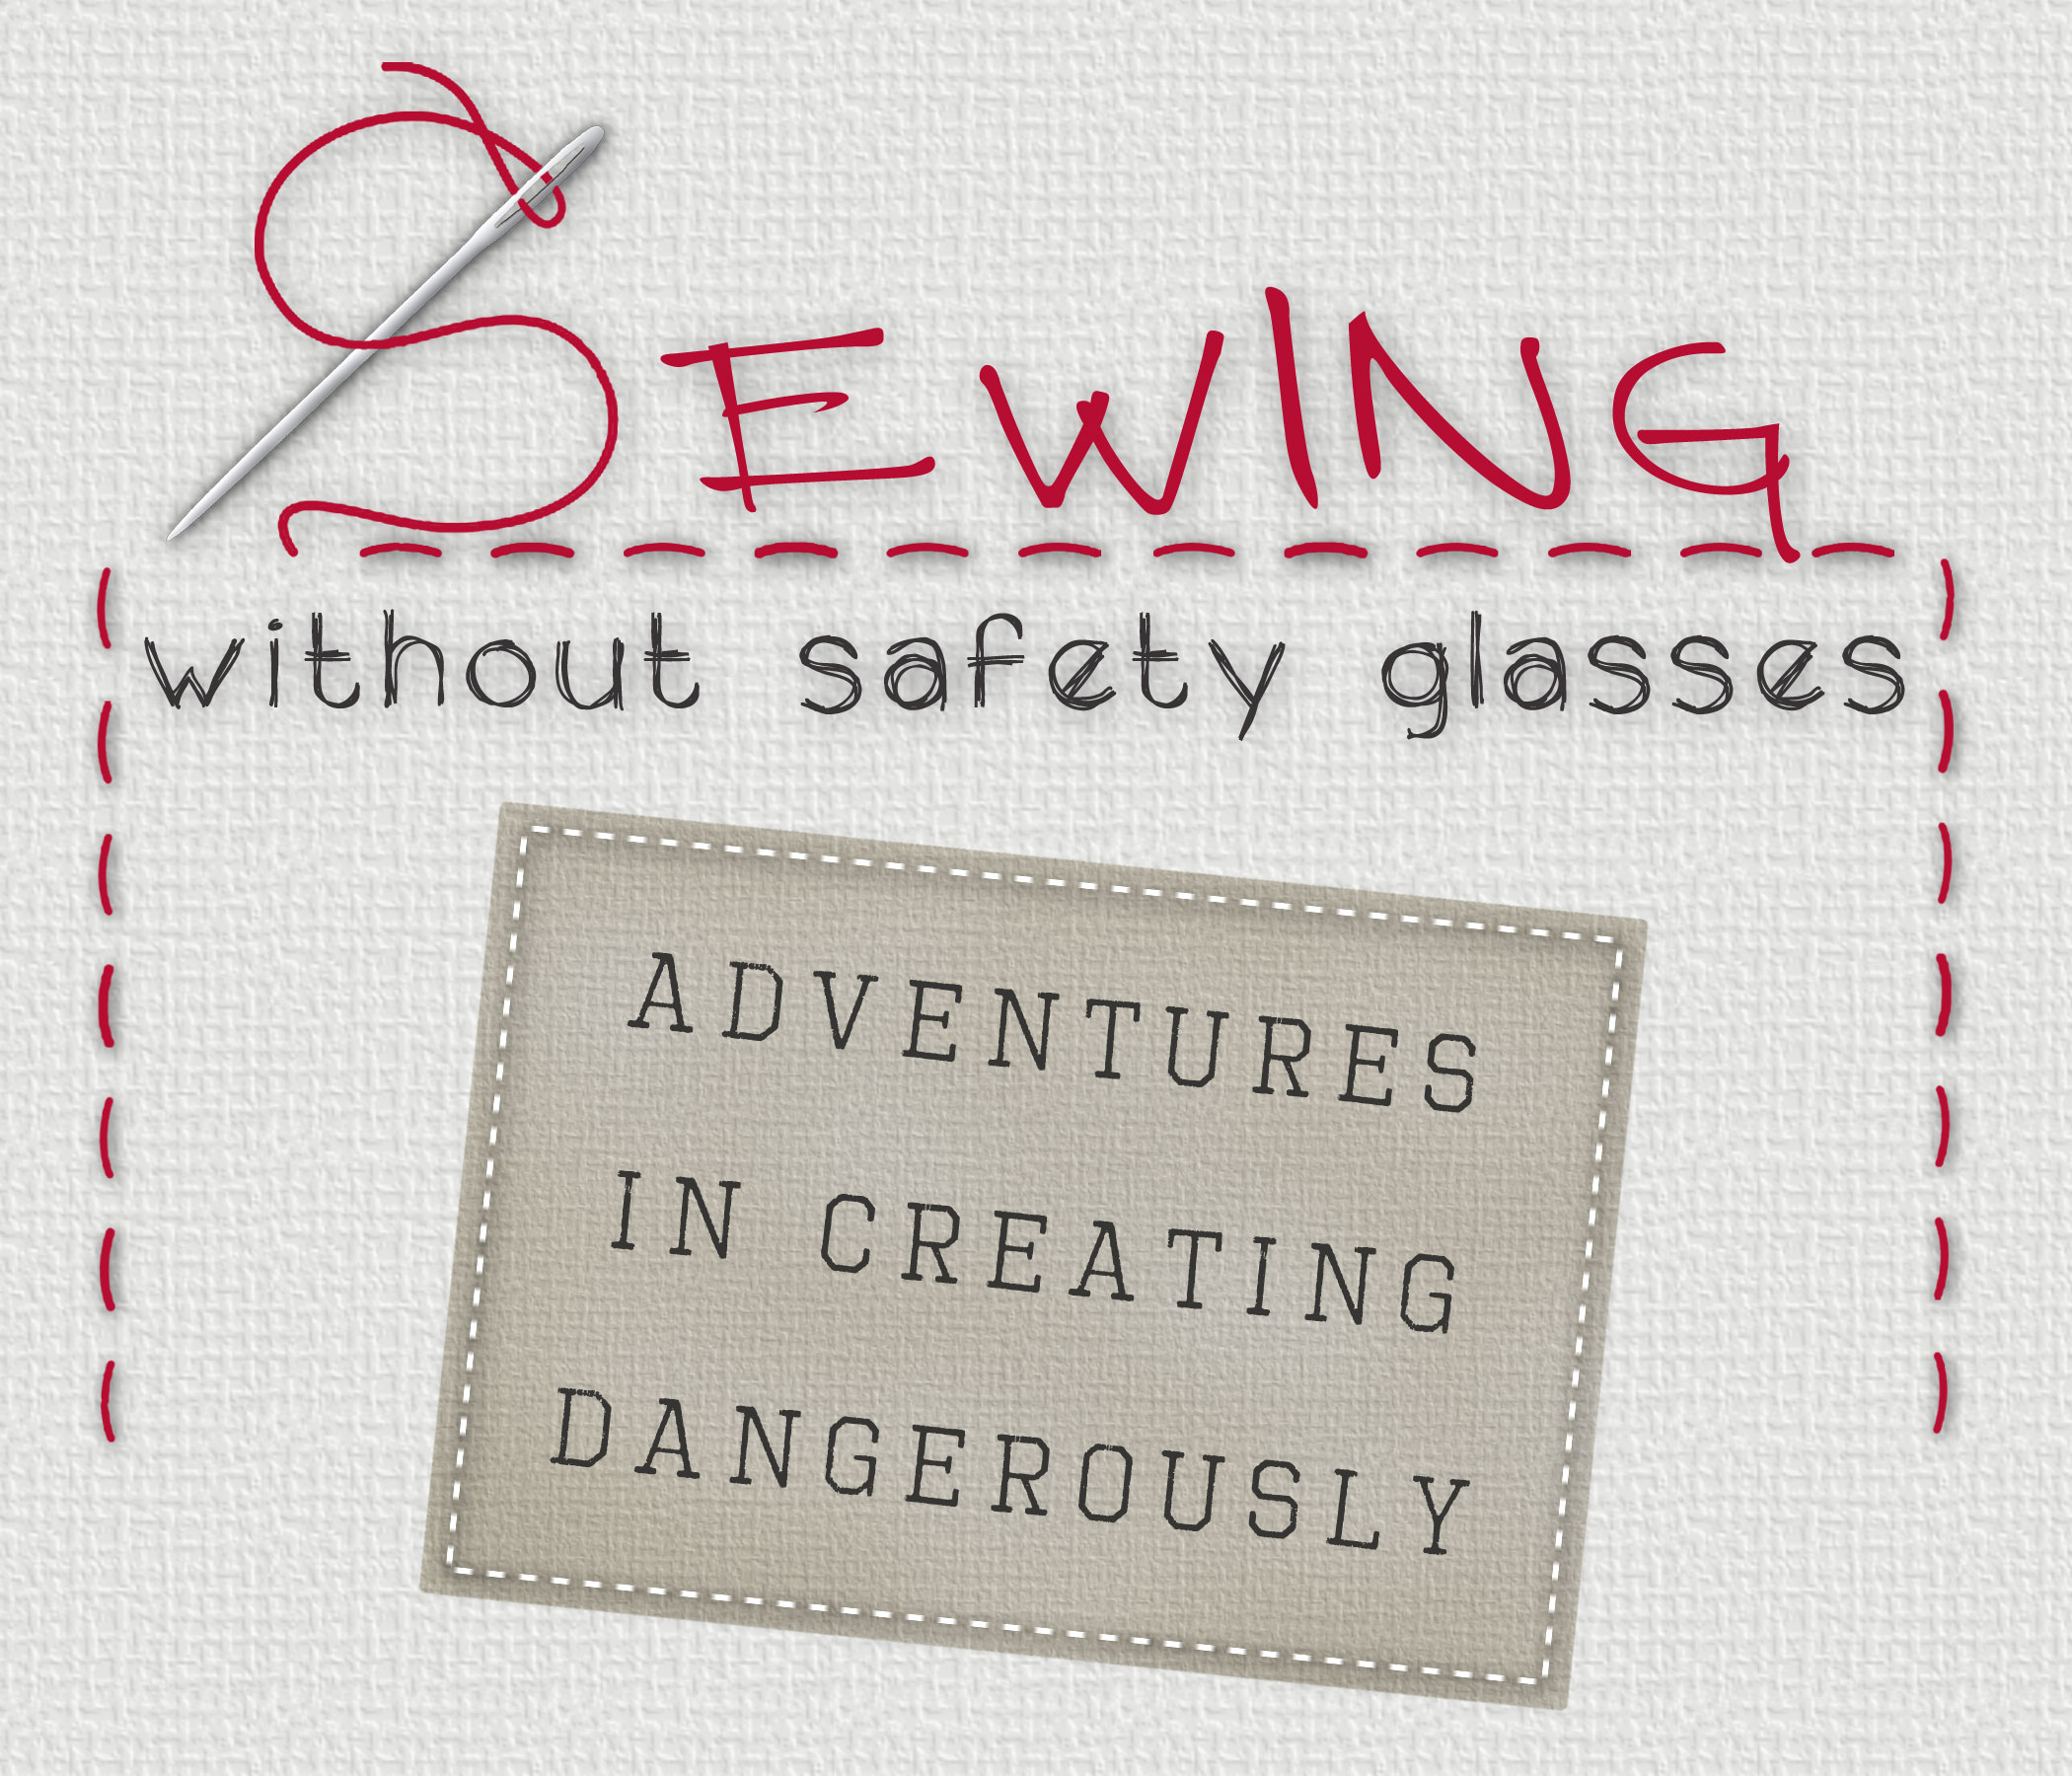 Sewing Without Safety Glasses: Adventures in Creating Dangerously